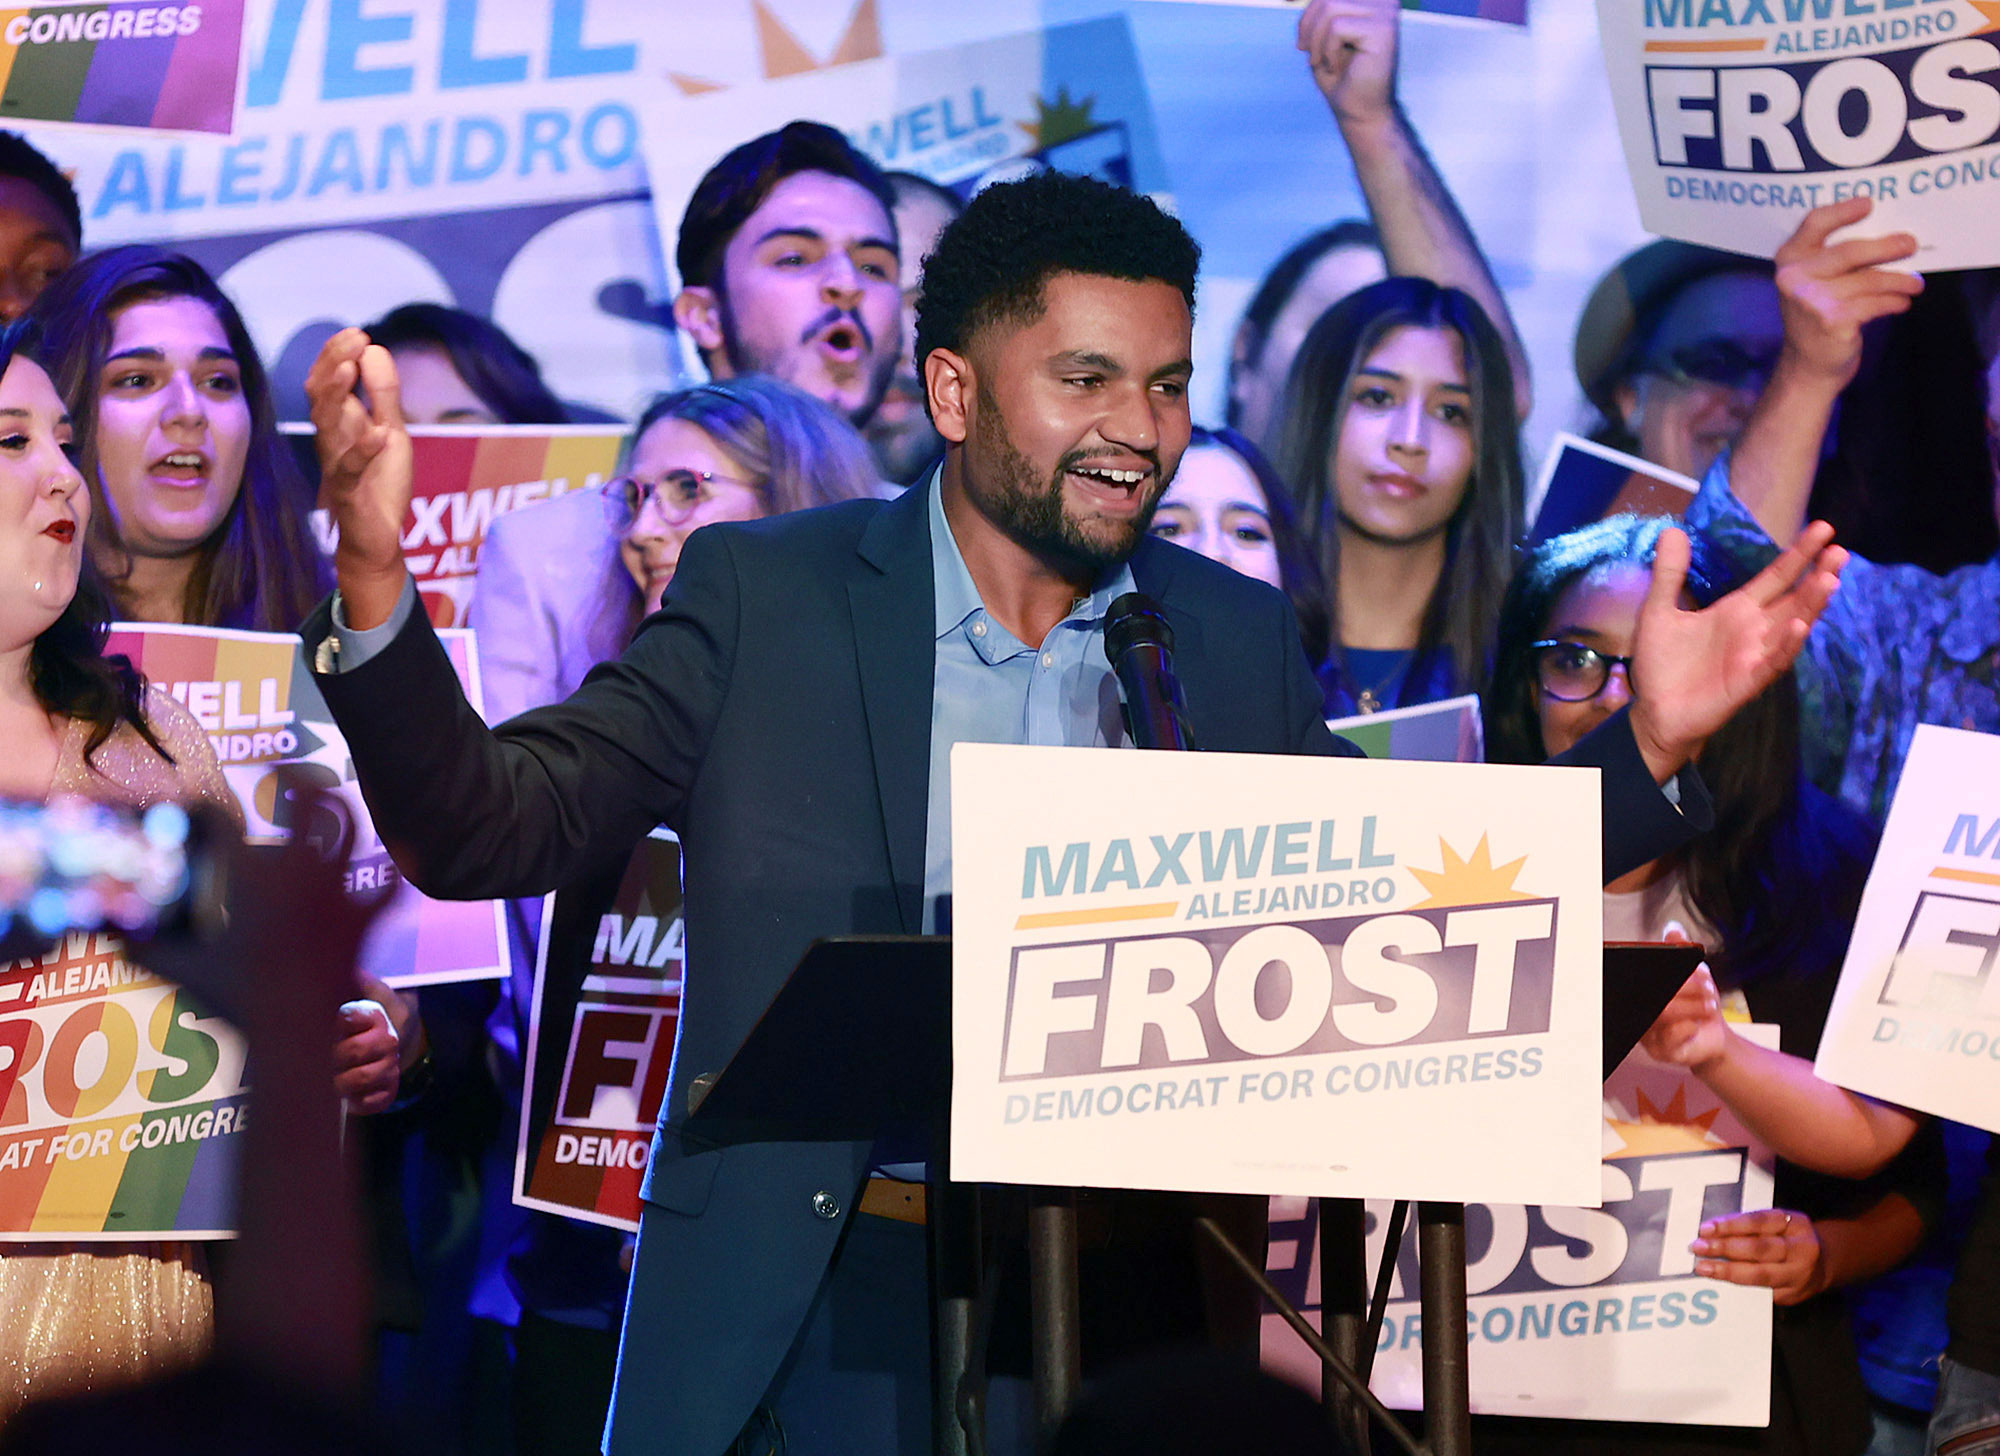 Democratic candidate for Florida's 10th Congressional District Maxwell Frost speaks as he celebrates with supporters during a victory party at The Abbey in Orlando, Fla., on Tuesday, Nov. 8, 2022. (Stephen M. Dowell—Orlando Sentinel/AP)